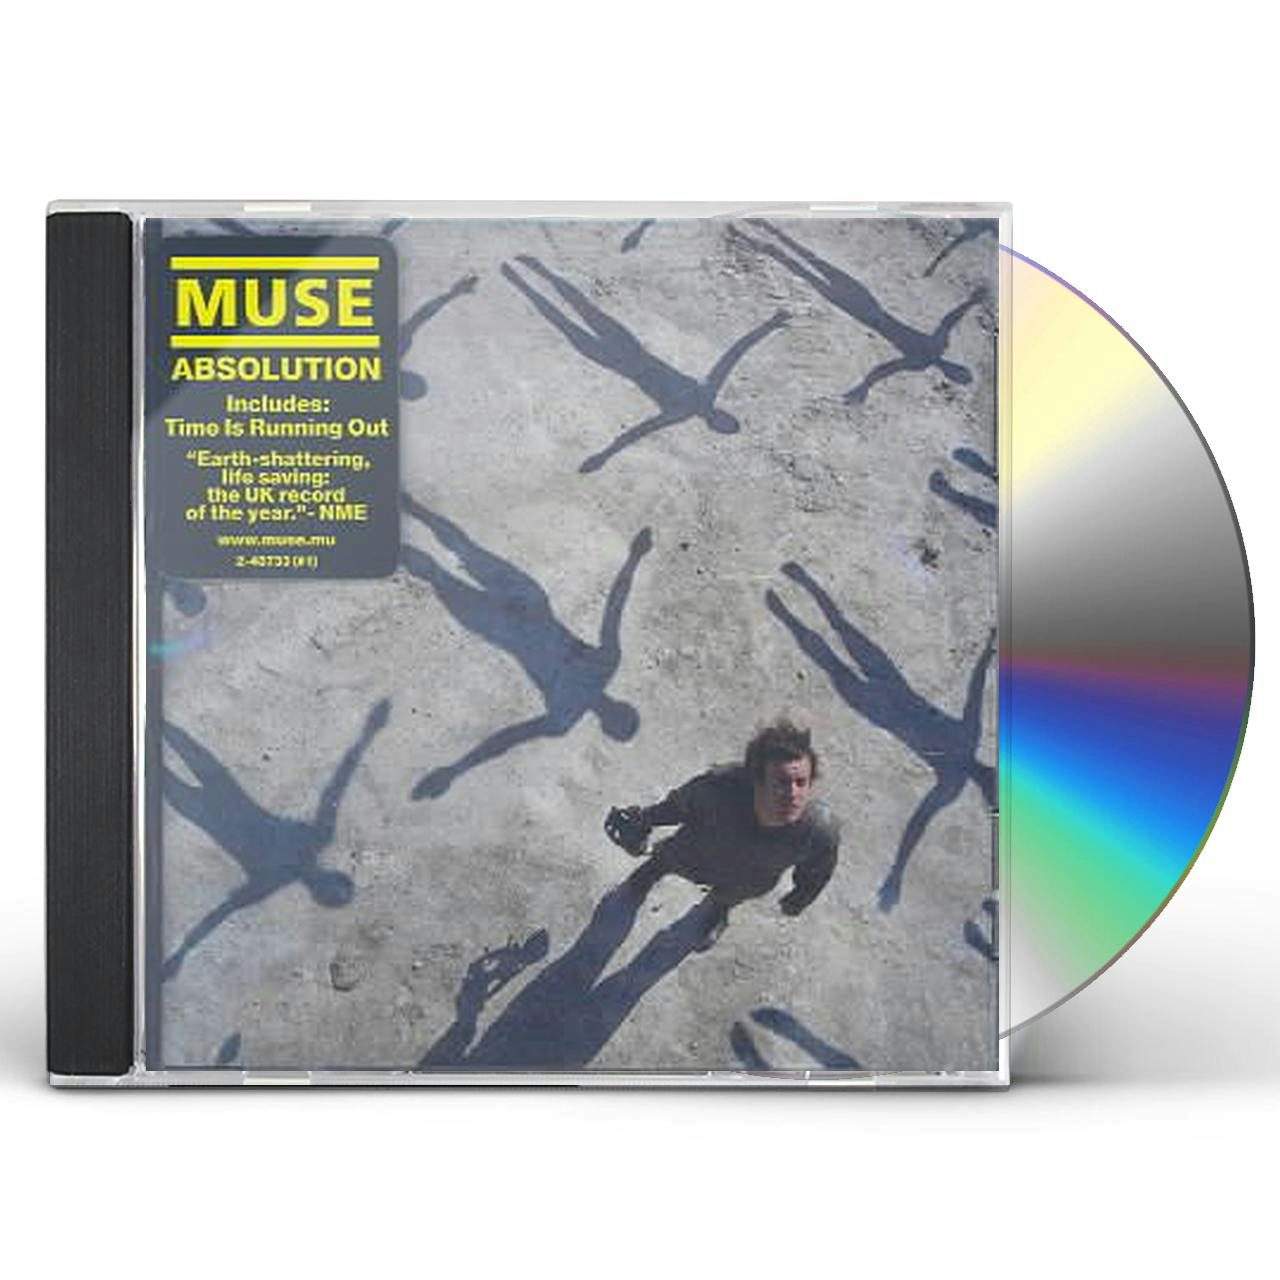 Muse ABSOLUTION CD